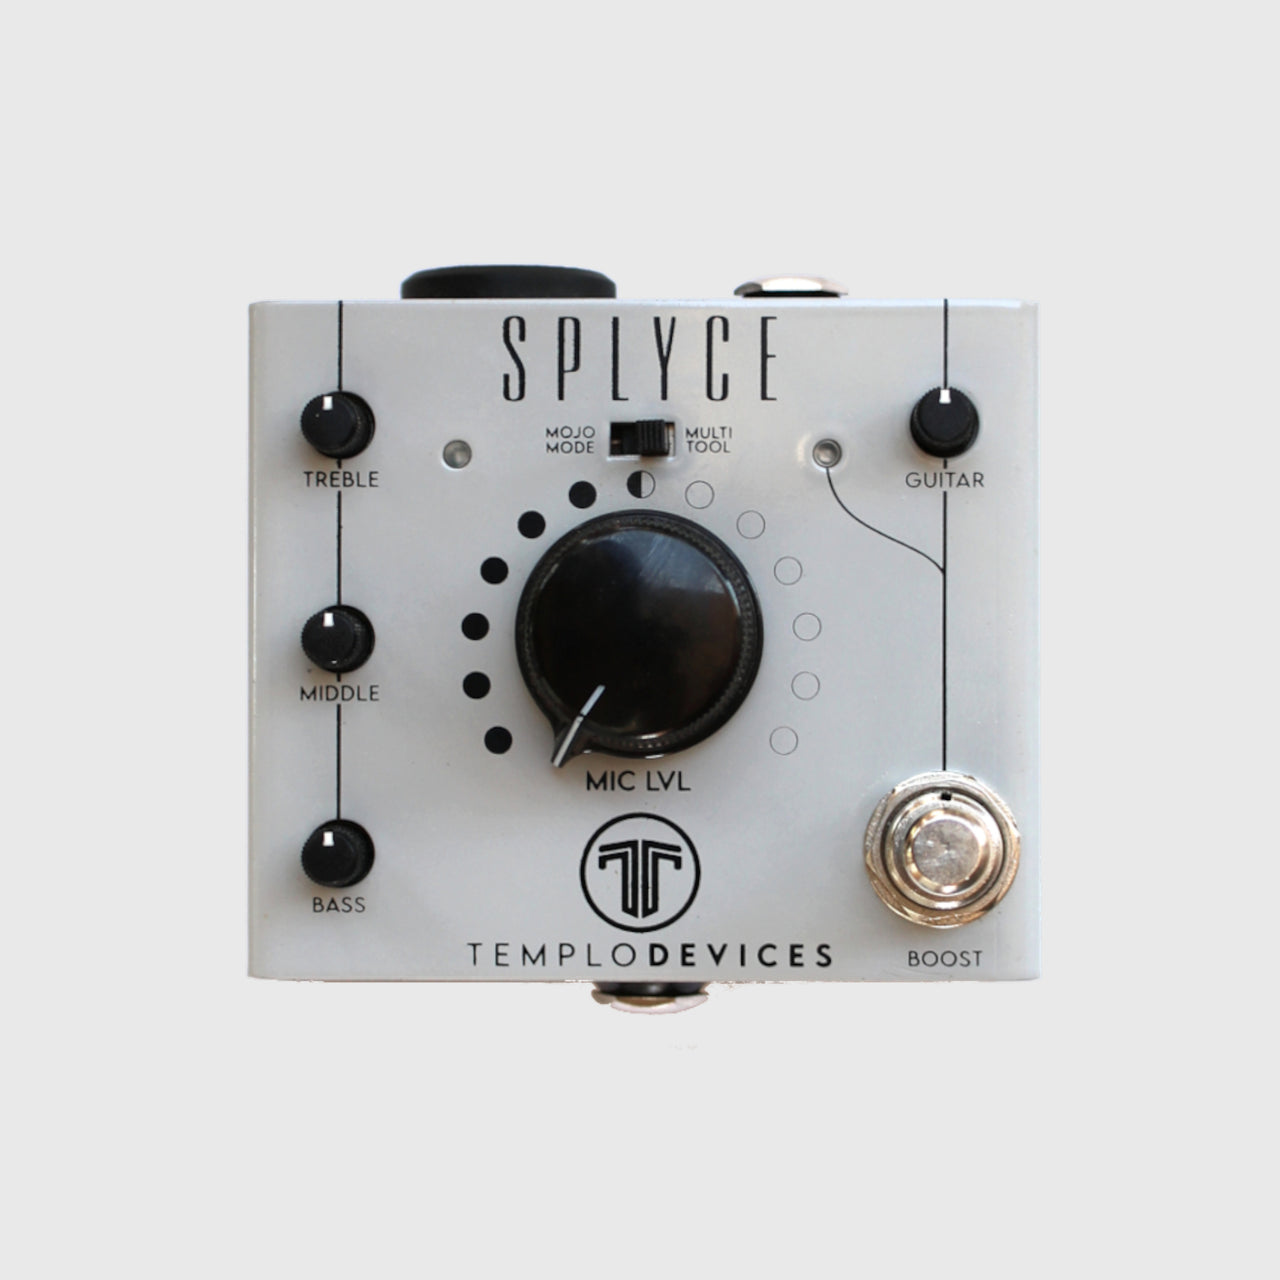 SPLYCE Mic Mixer / Clean Guitar Boost Preamp